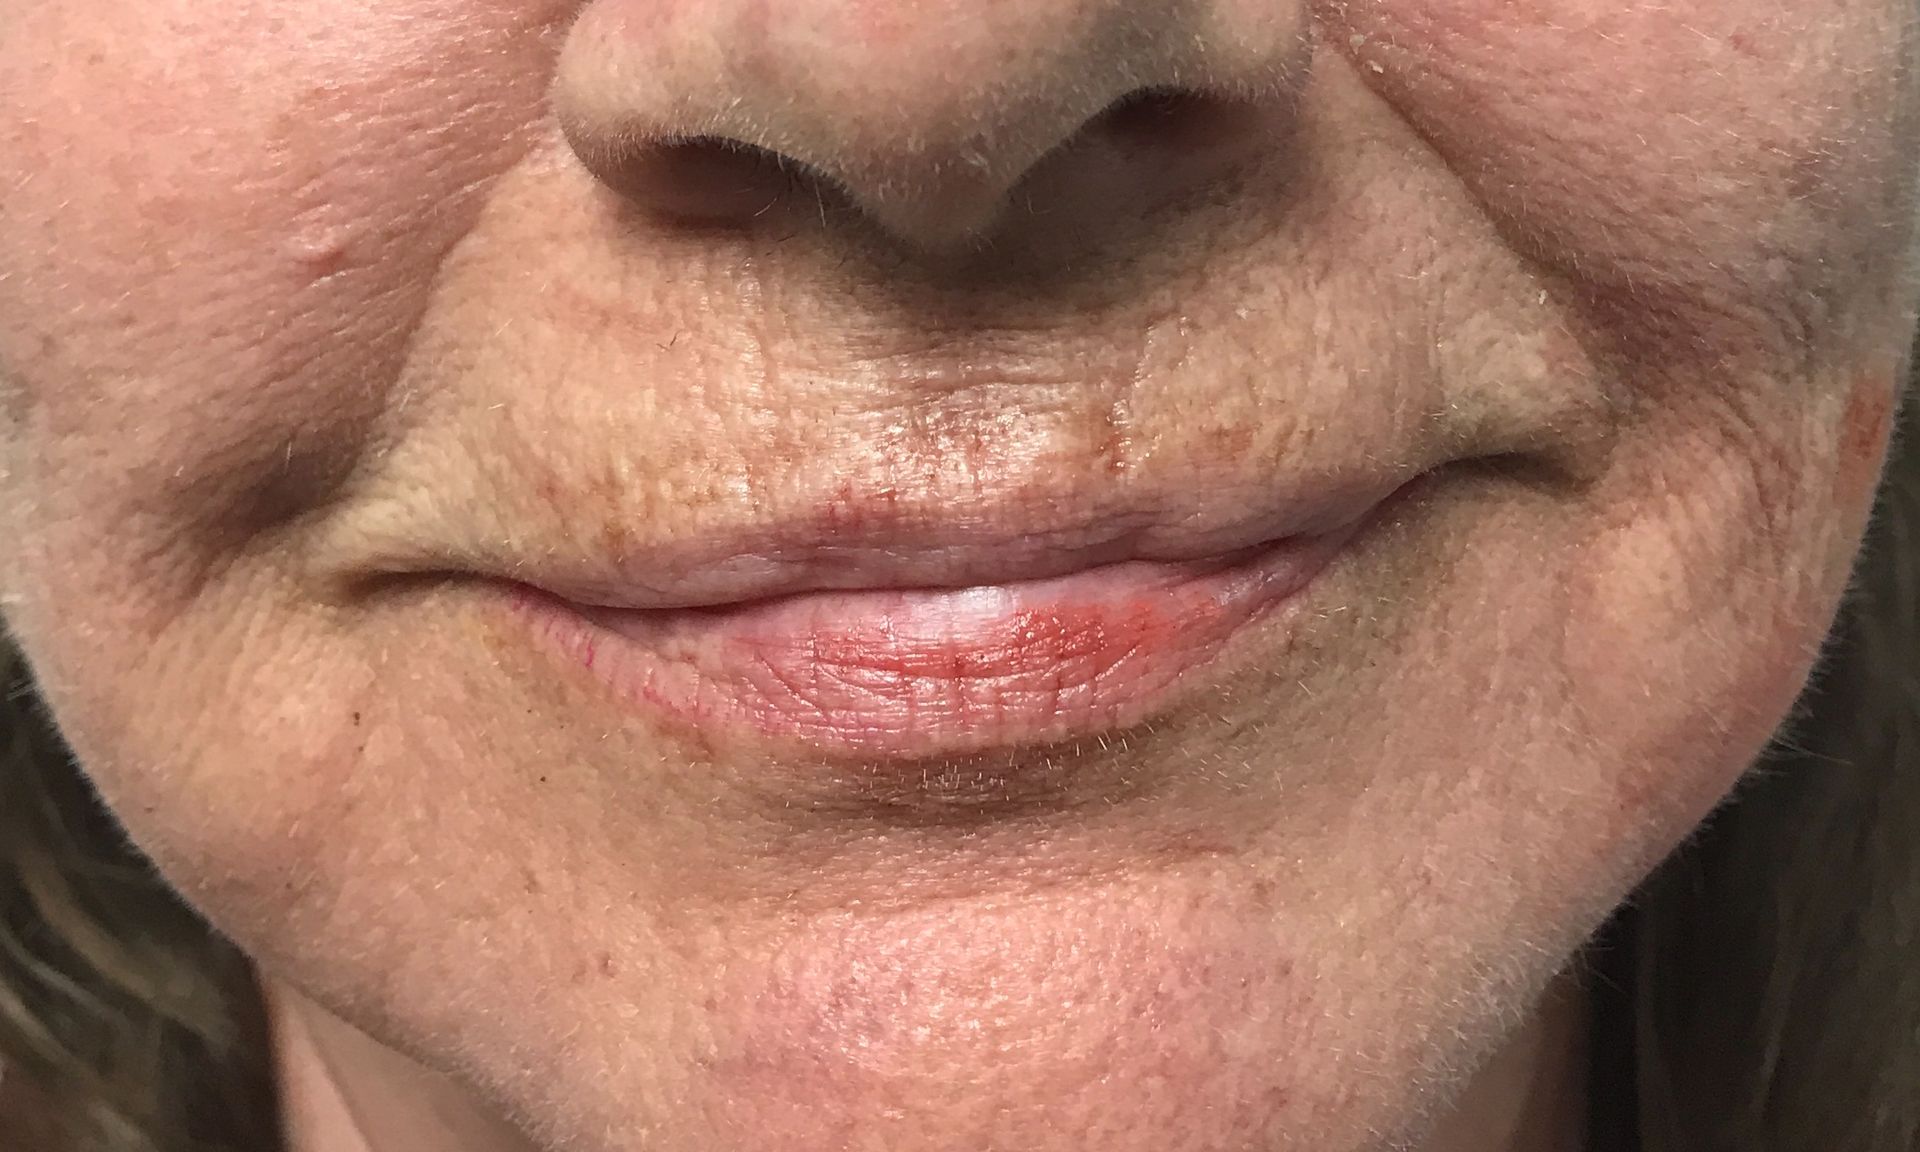 A close up of a woman 's face with wrinkles and red lips.